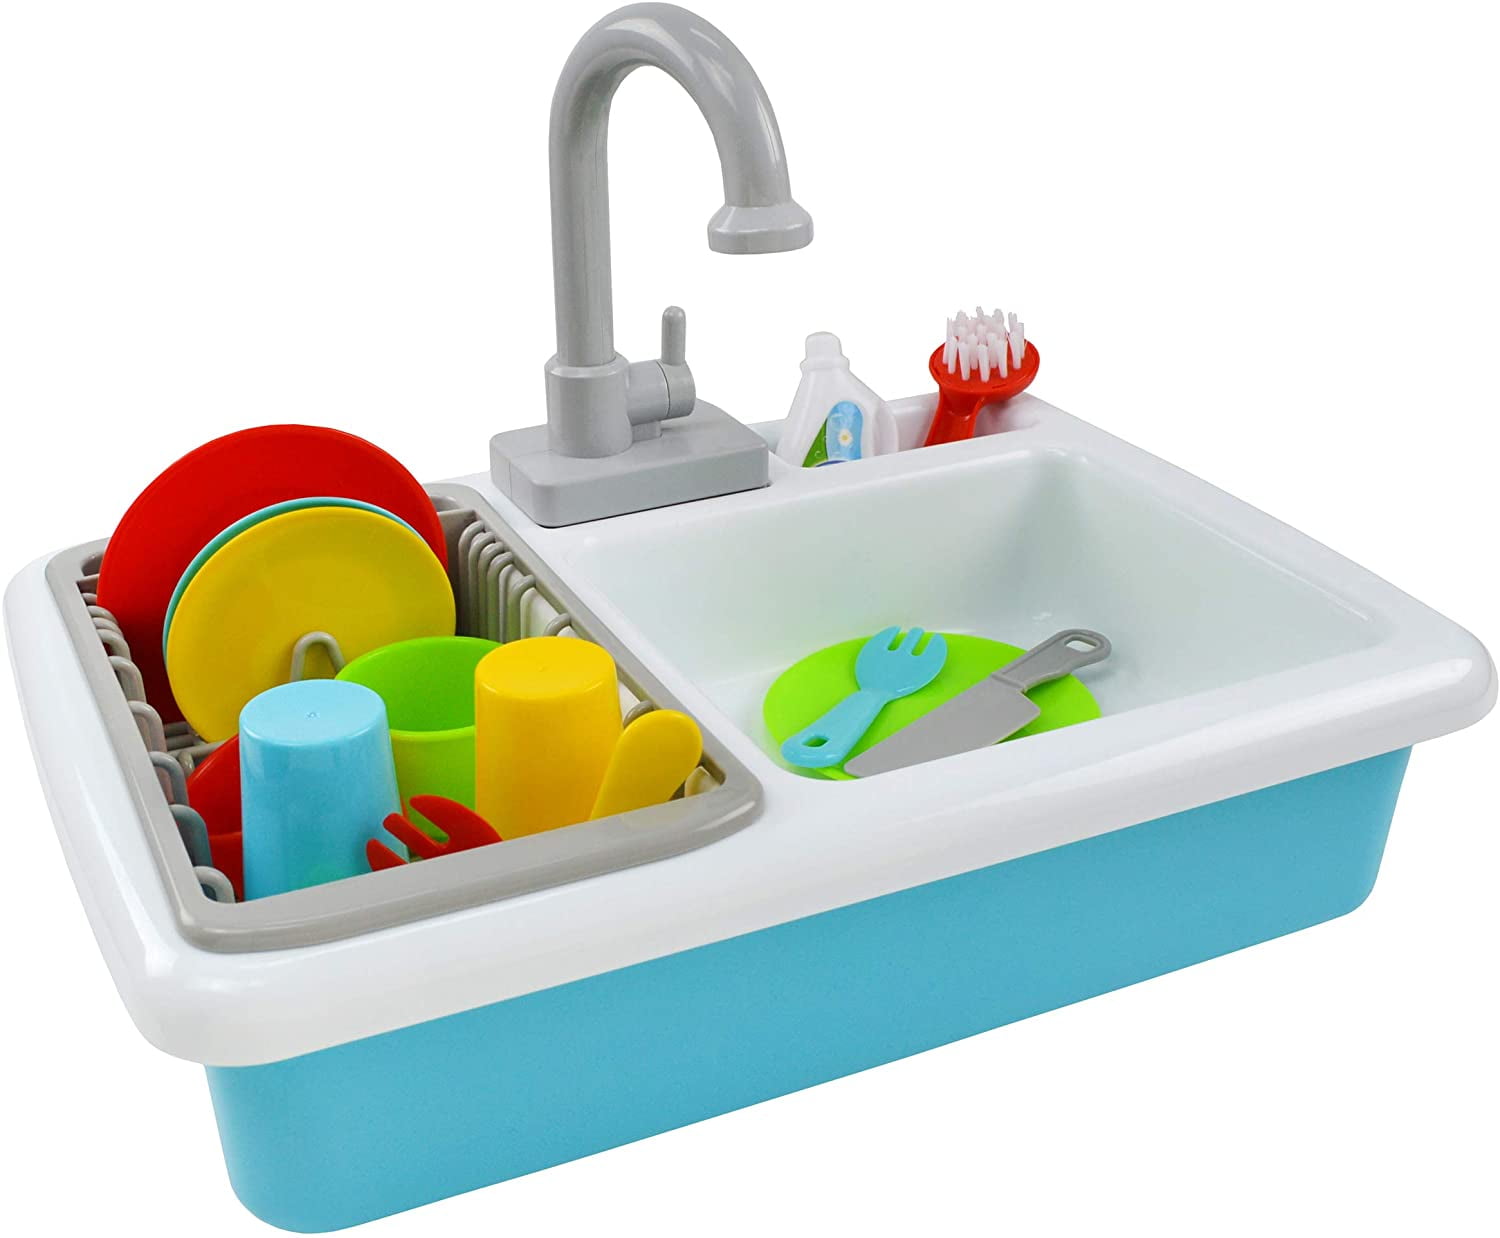 Jimmy's Toys Kids Play Pretend Dish Washing Sink Basin with Real Working Faucet , Dish Rack